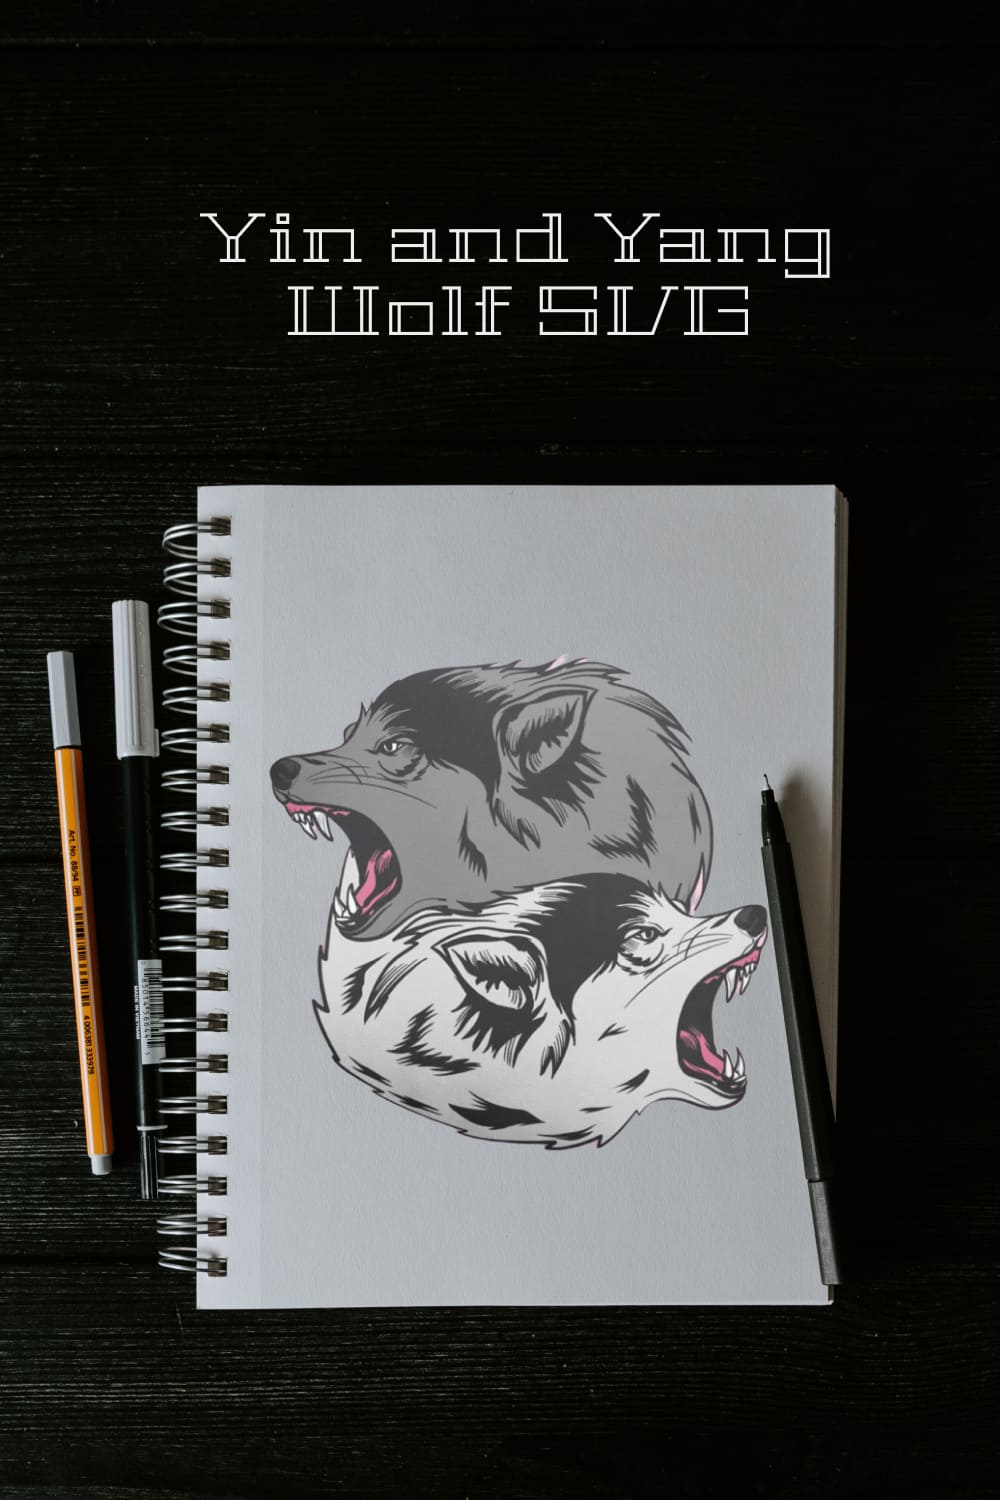 Notebook with a drawing of two wolfs on it.